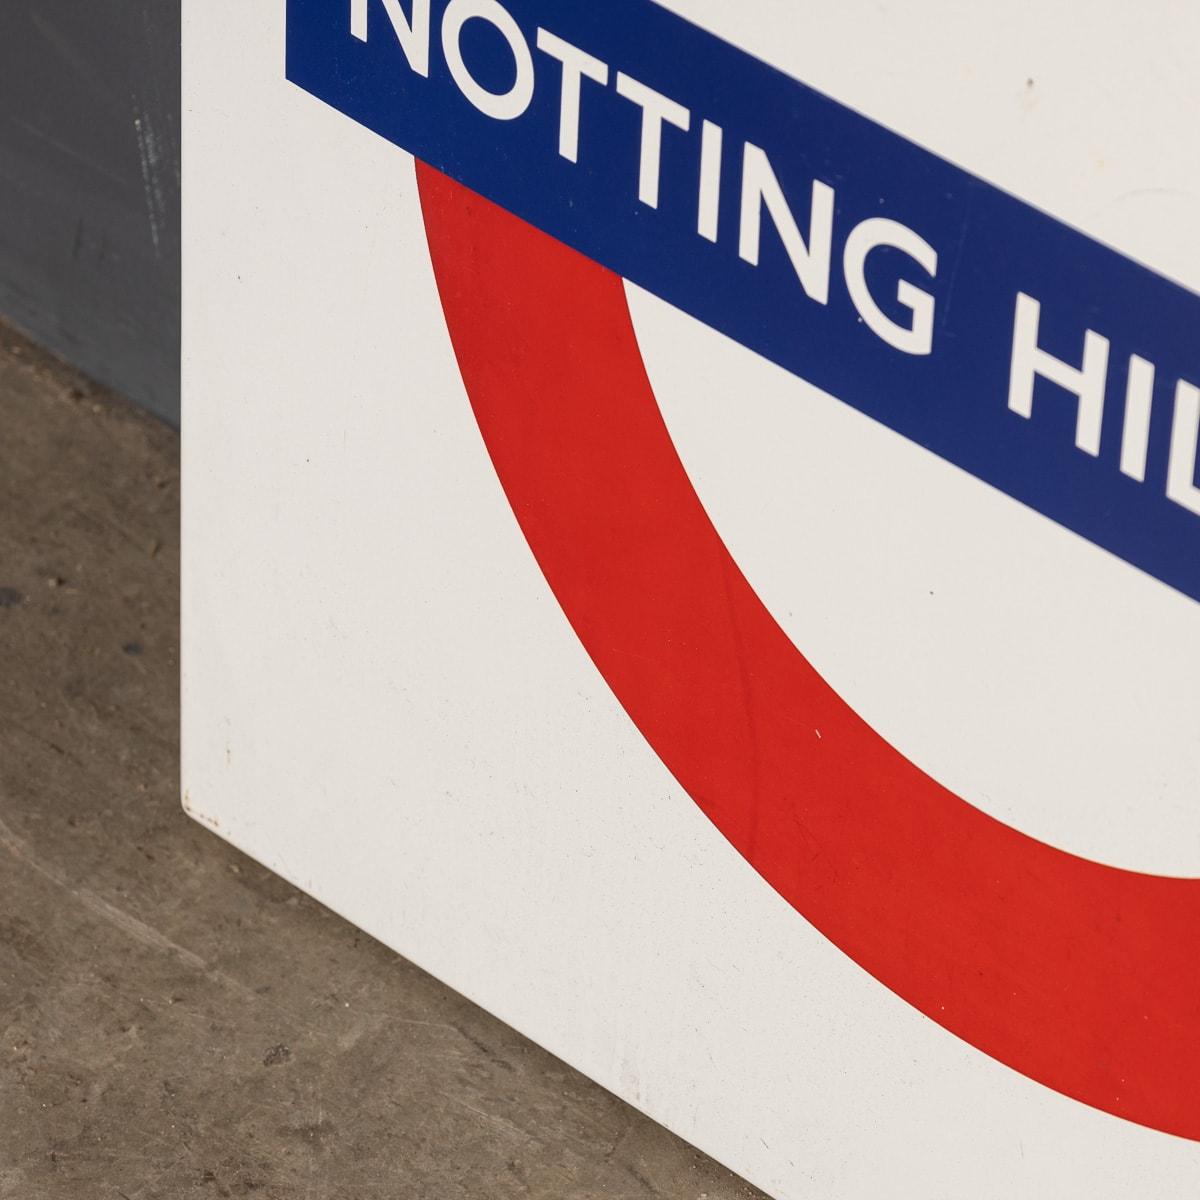 Metal 20th Century Enamelled London Underground Notting Hill Gate Station Sign c.1970 For Sale